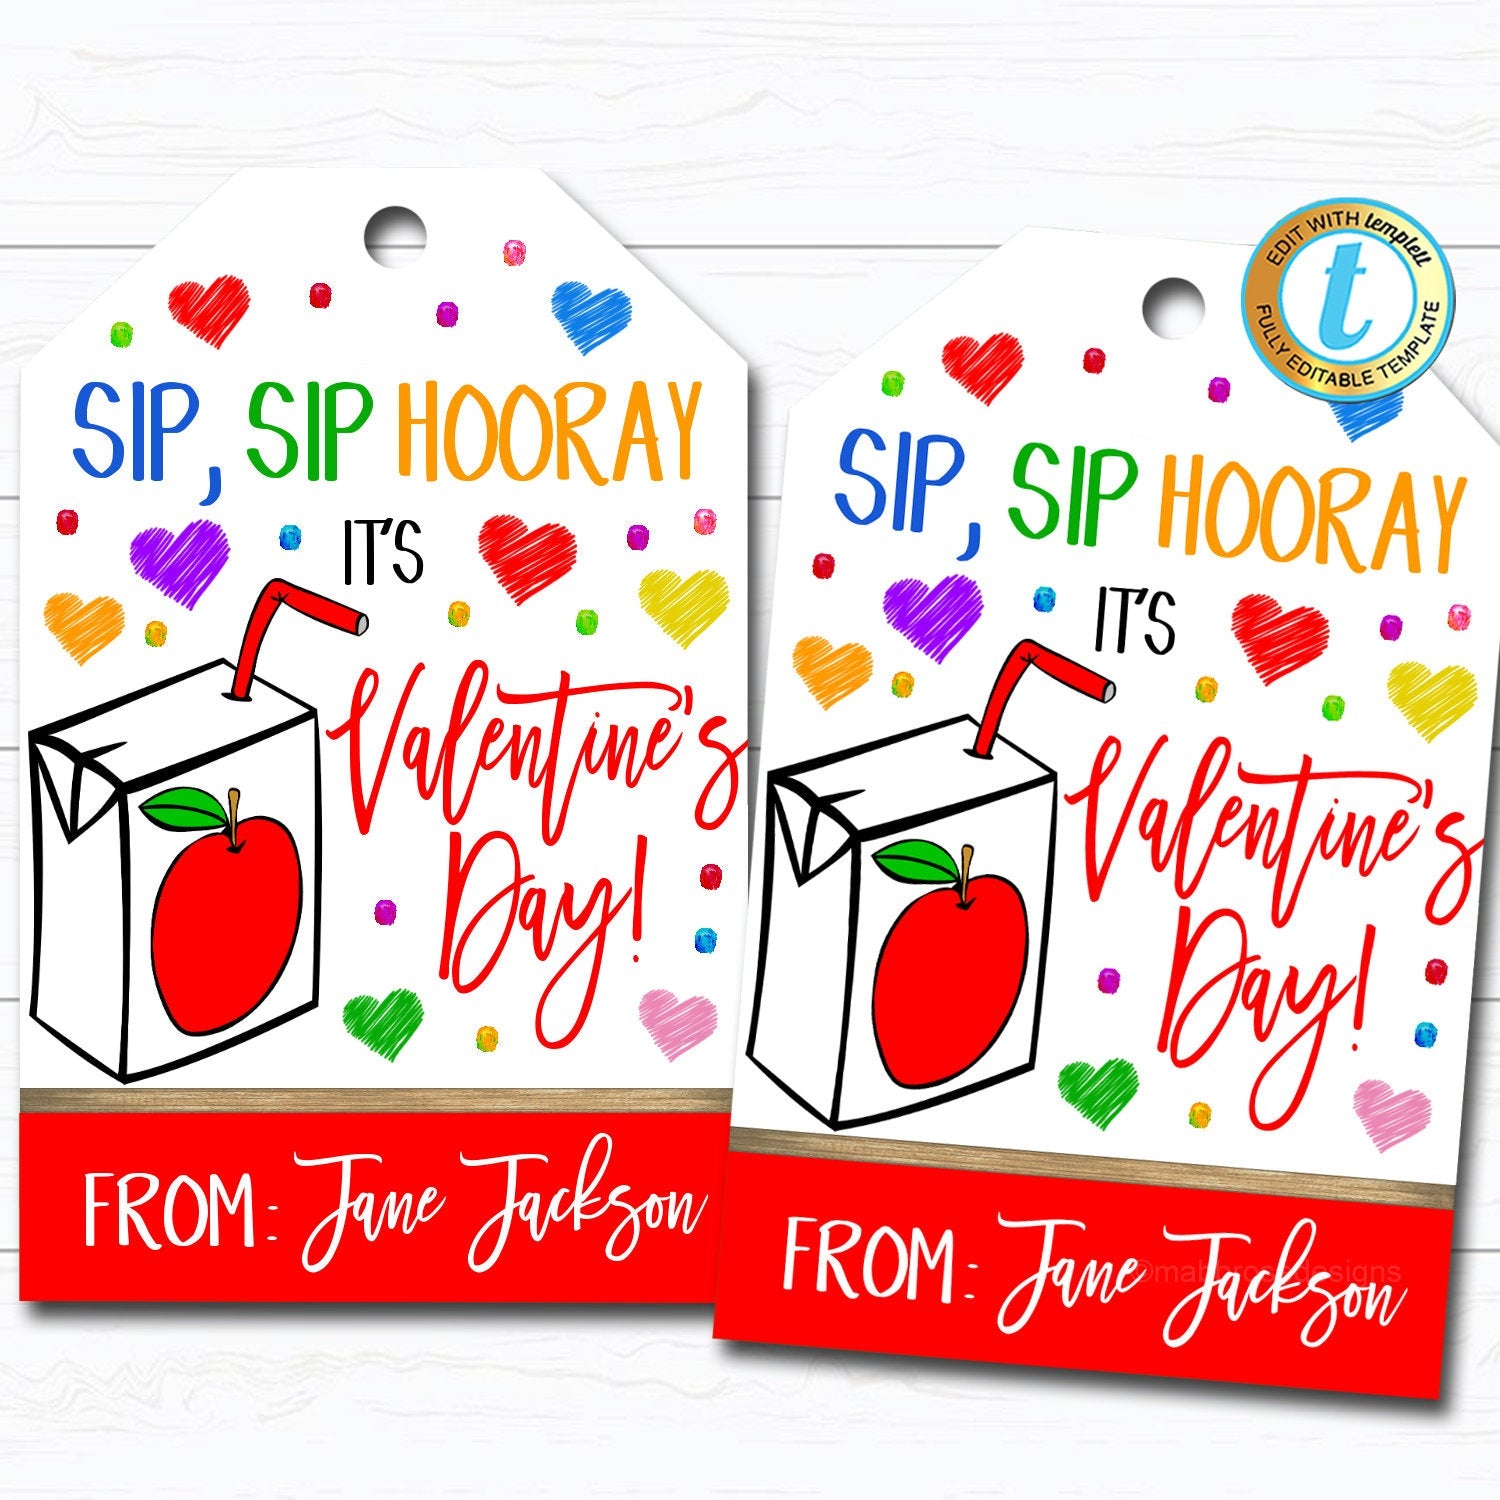 Self Care Package Ideas + Free Printable Labels & Gift Tags  Labels  printables free, Homemade care package, Valentines day cards diy